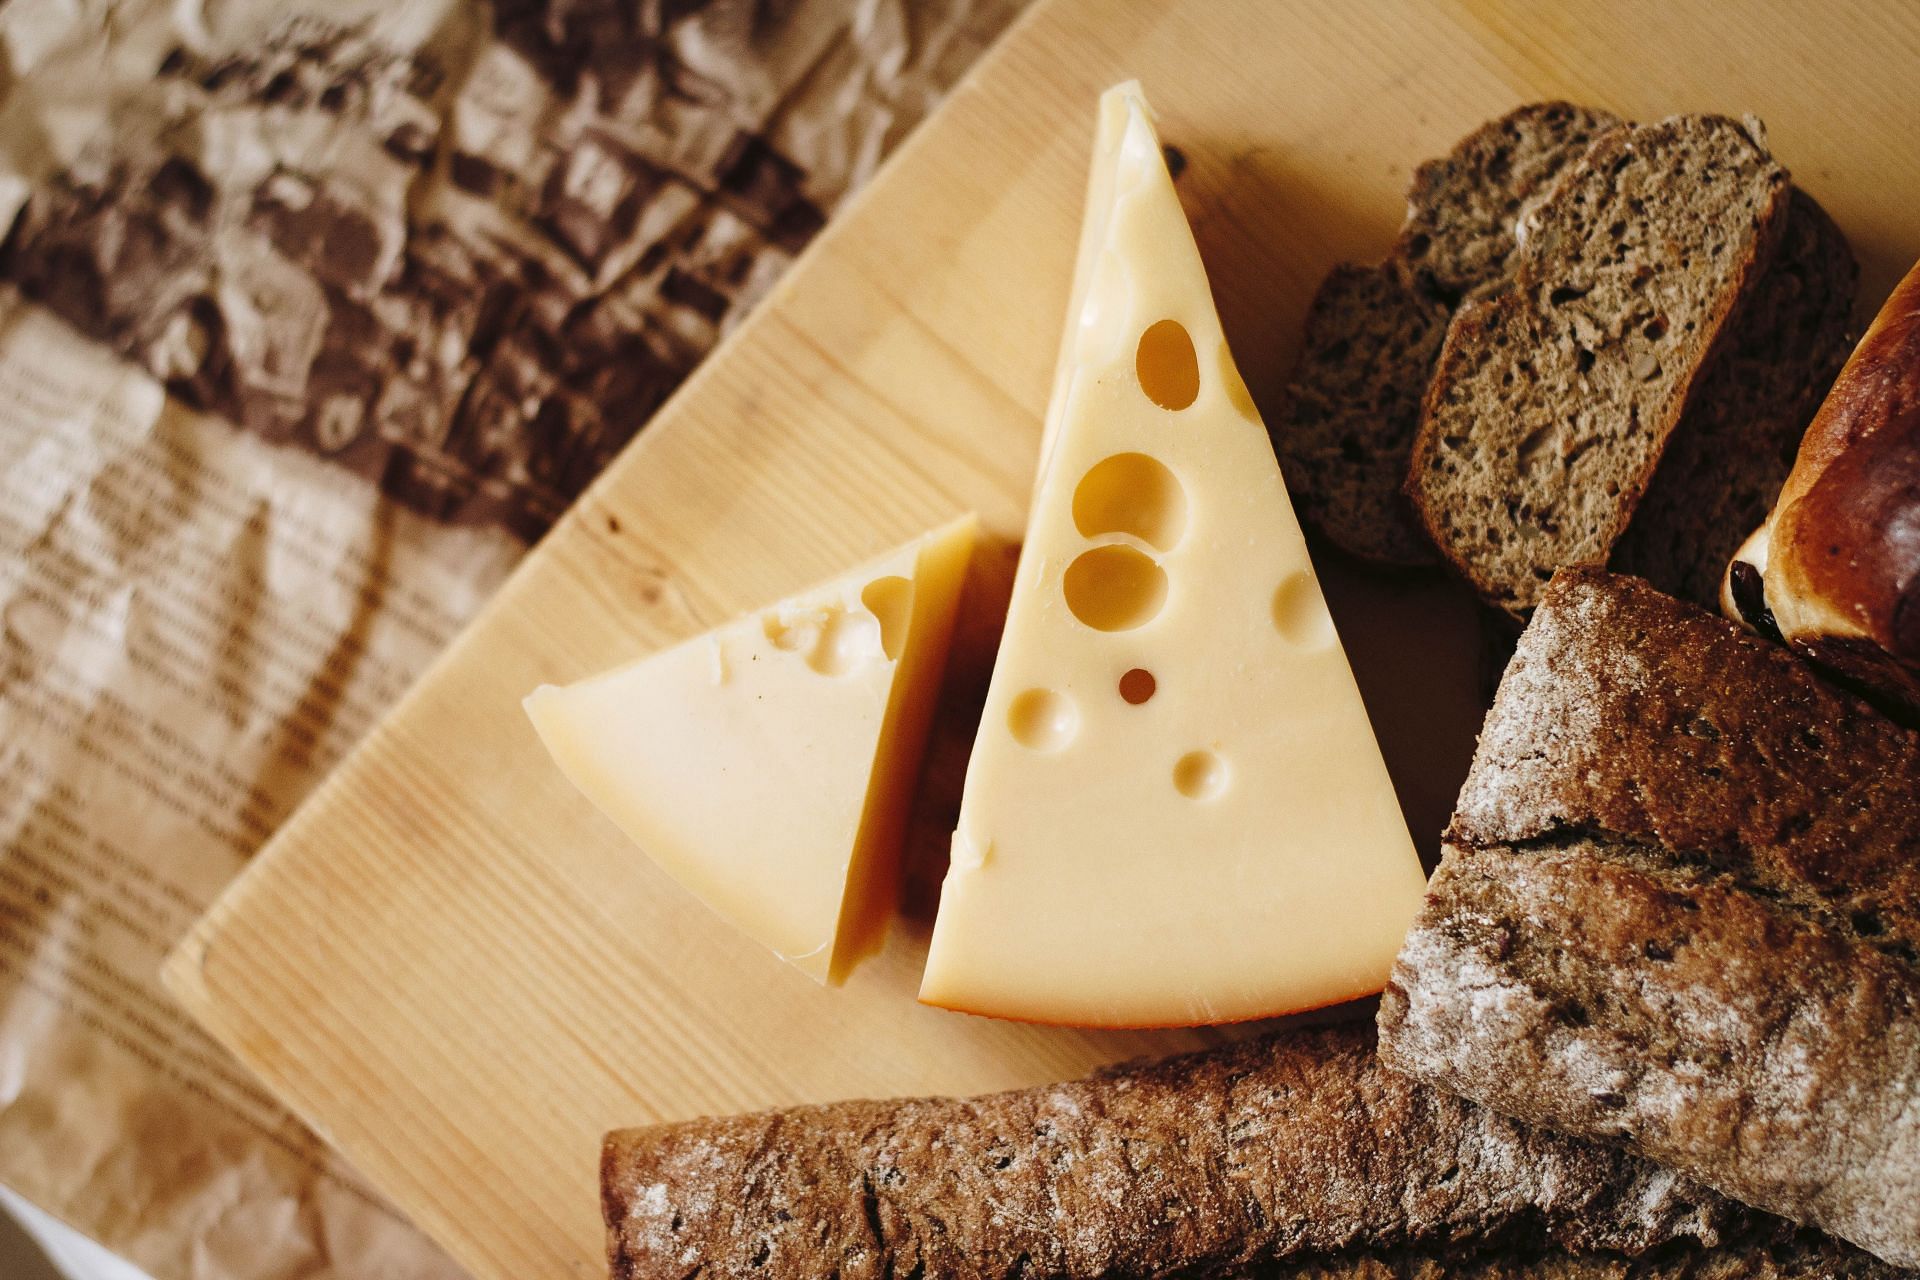 Contrary to popular belief, cheese is actually quite nutritious, being an excellent source of healthy fats, protein and calcium (Image via Pexels @Nastyasensei)